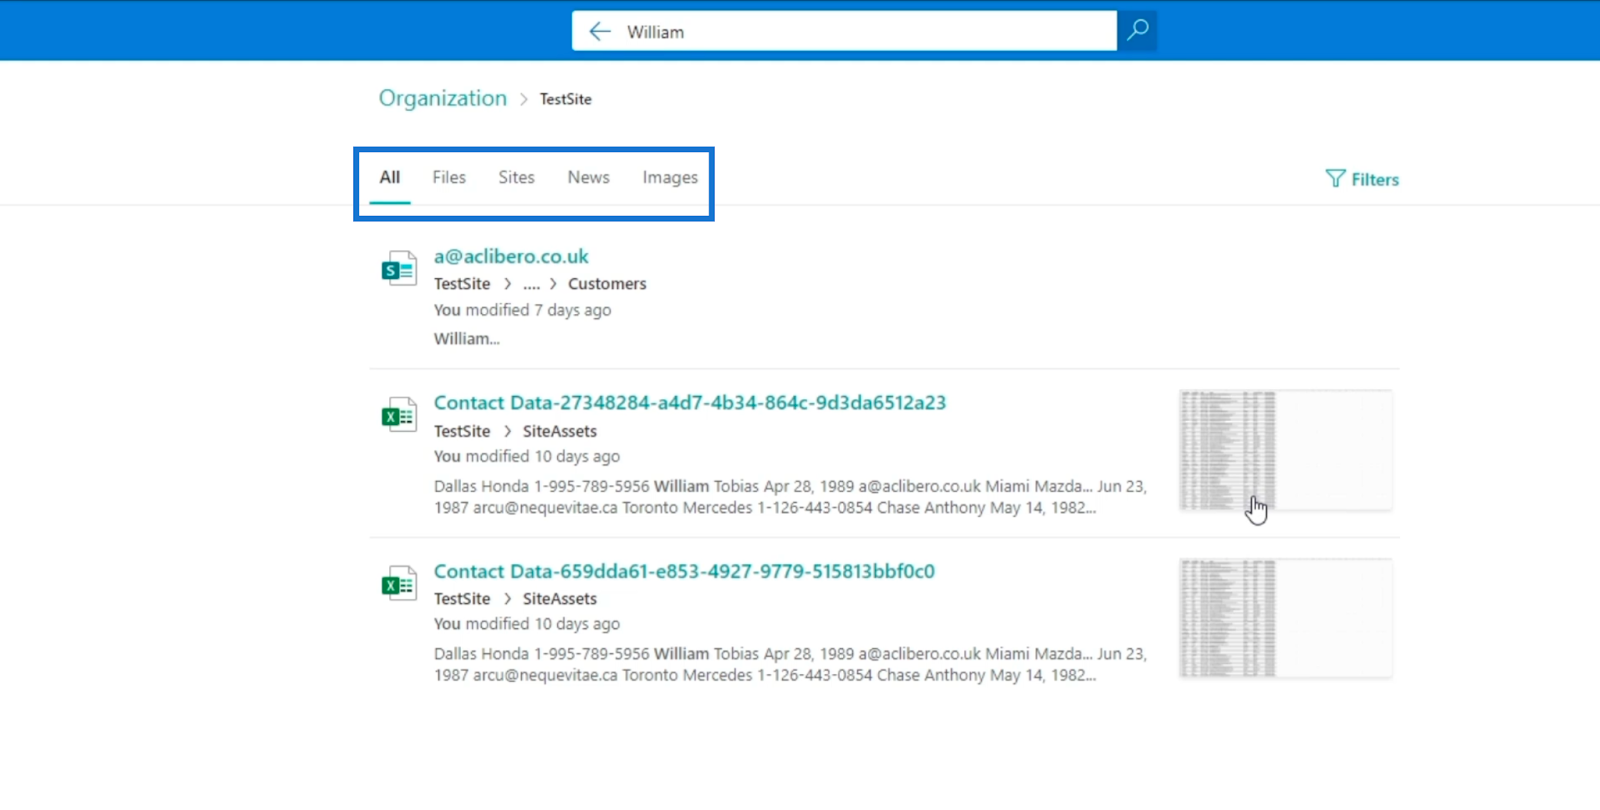 SharePoint search